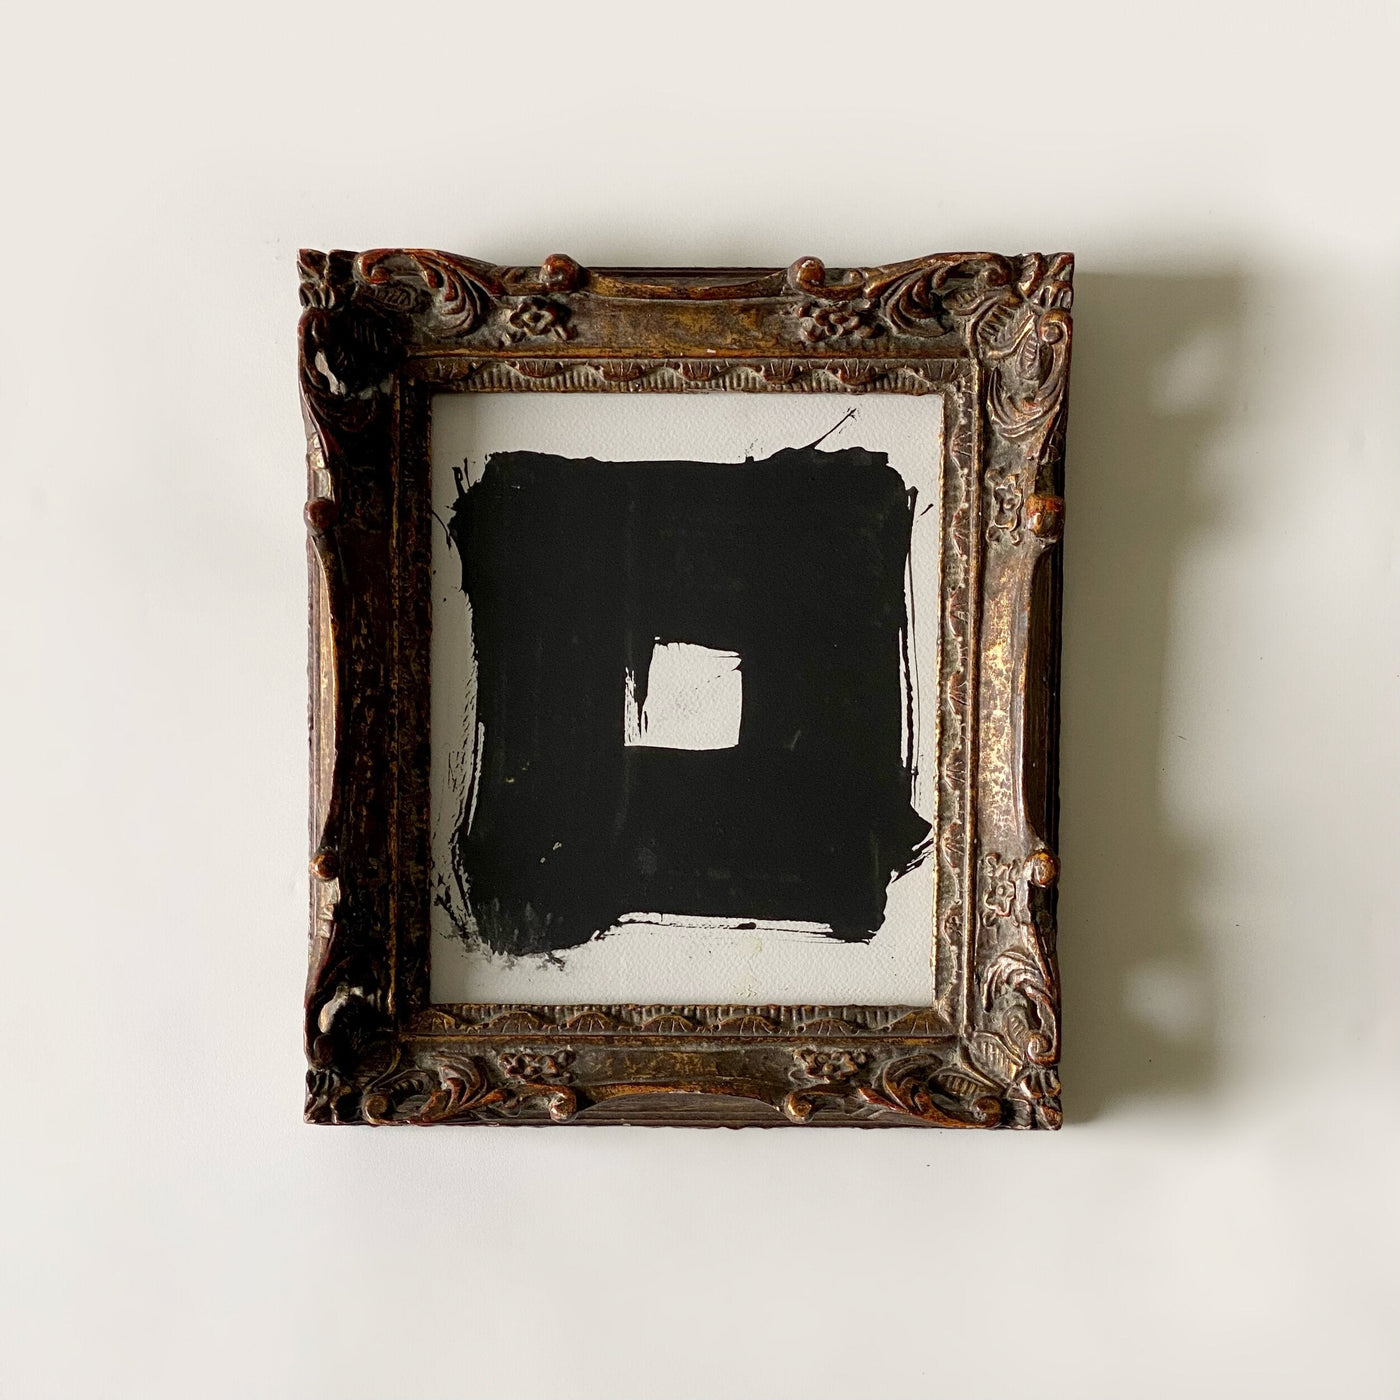 Abstract Cube By Matt Wood In Ornate Gold Frame